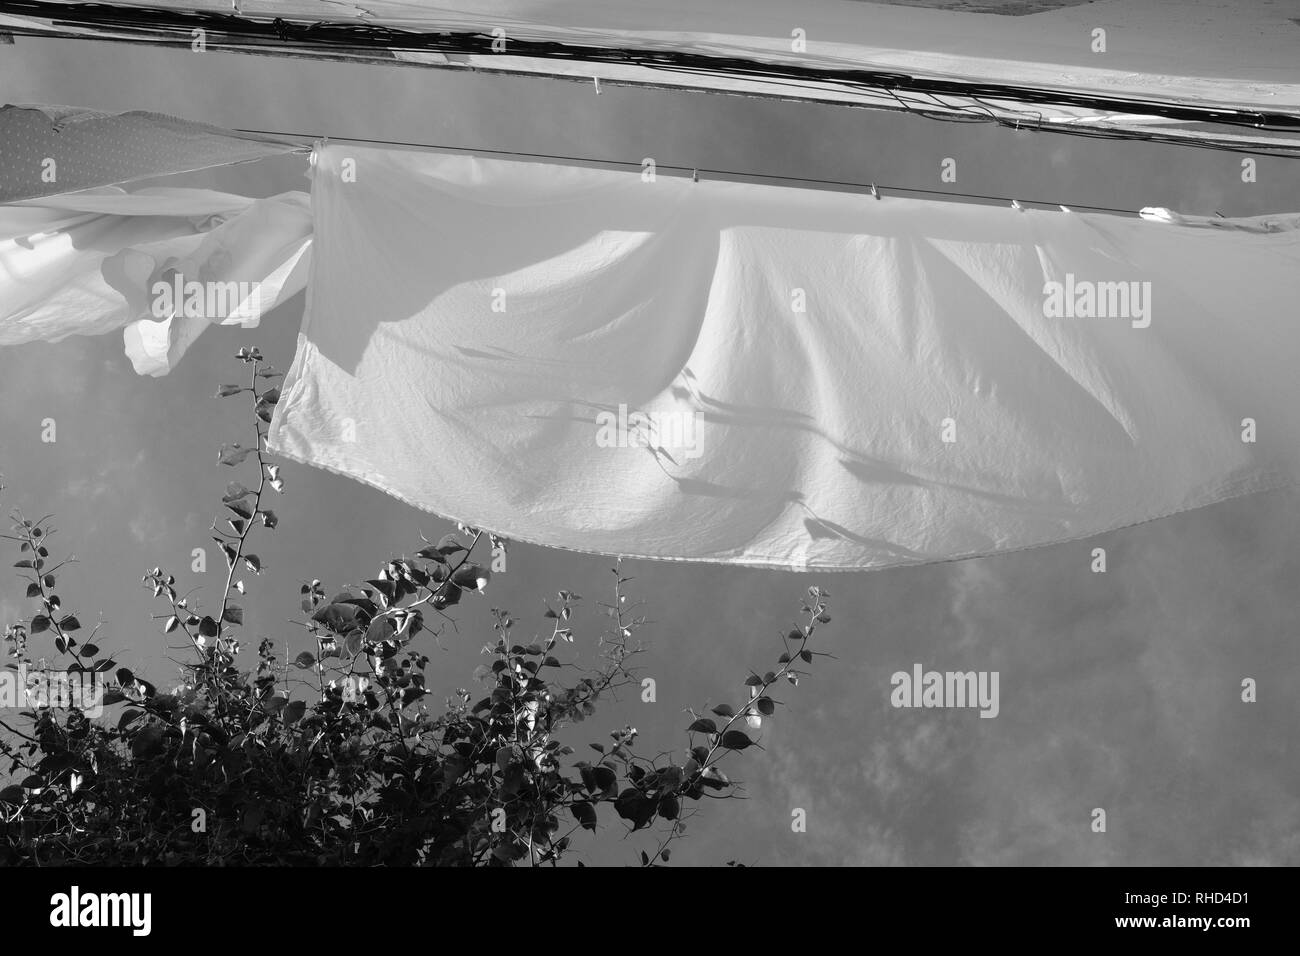 Pure white sheets hanging out to dry on a windy day on a washing line Stock Photo